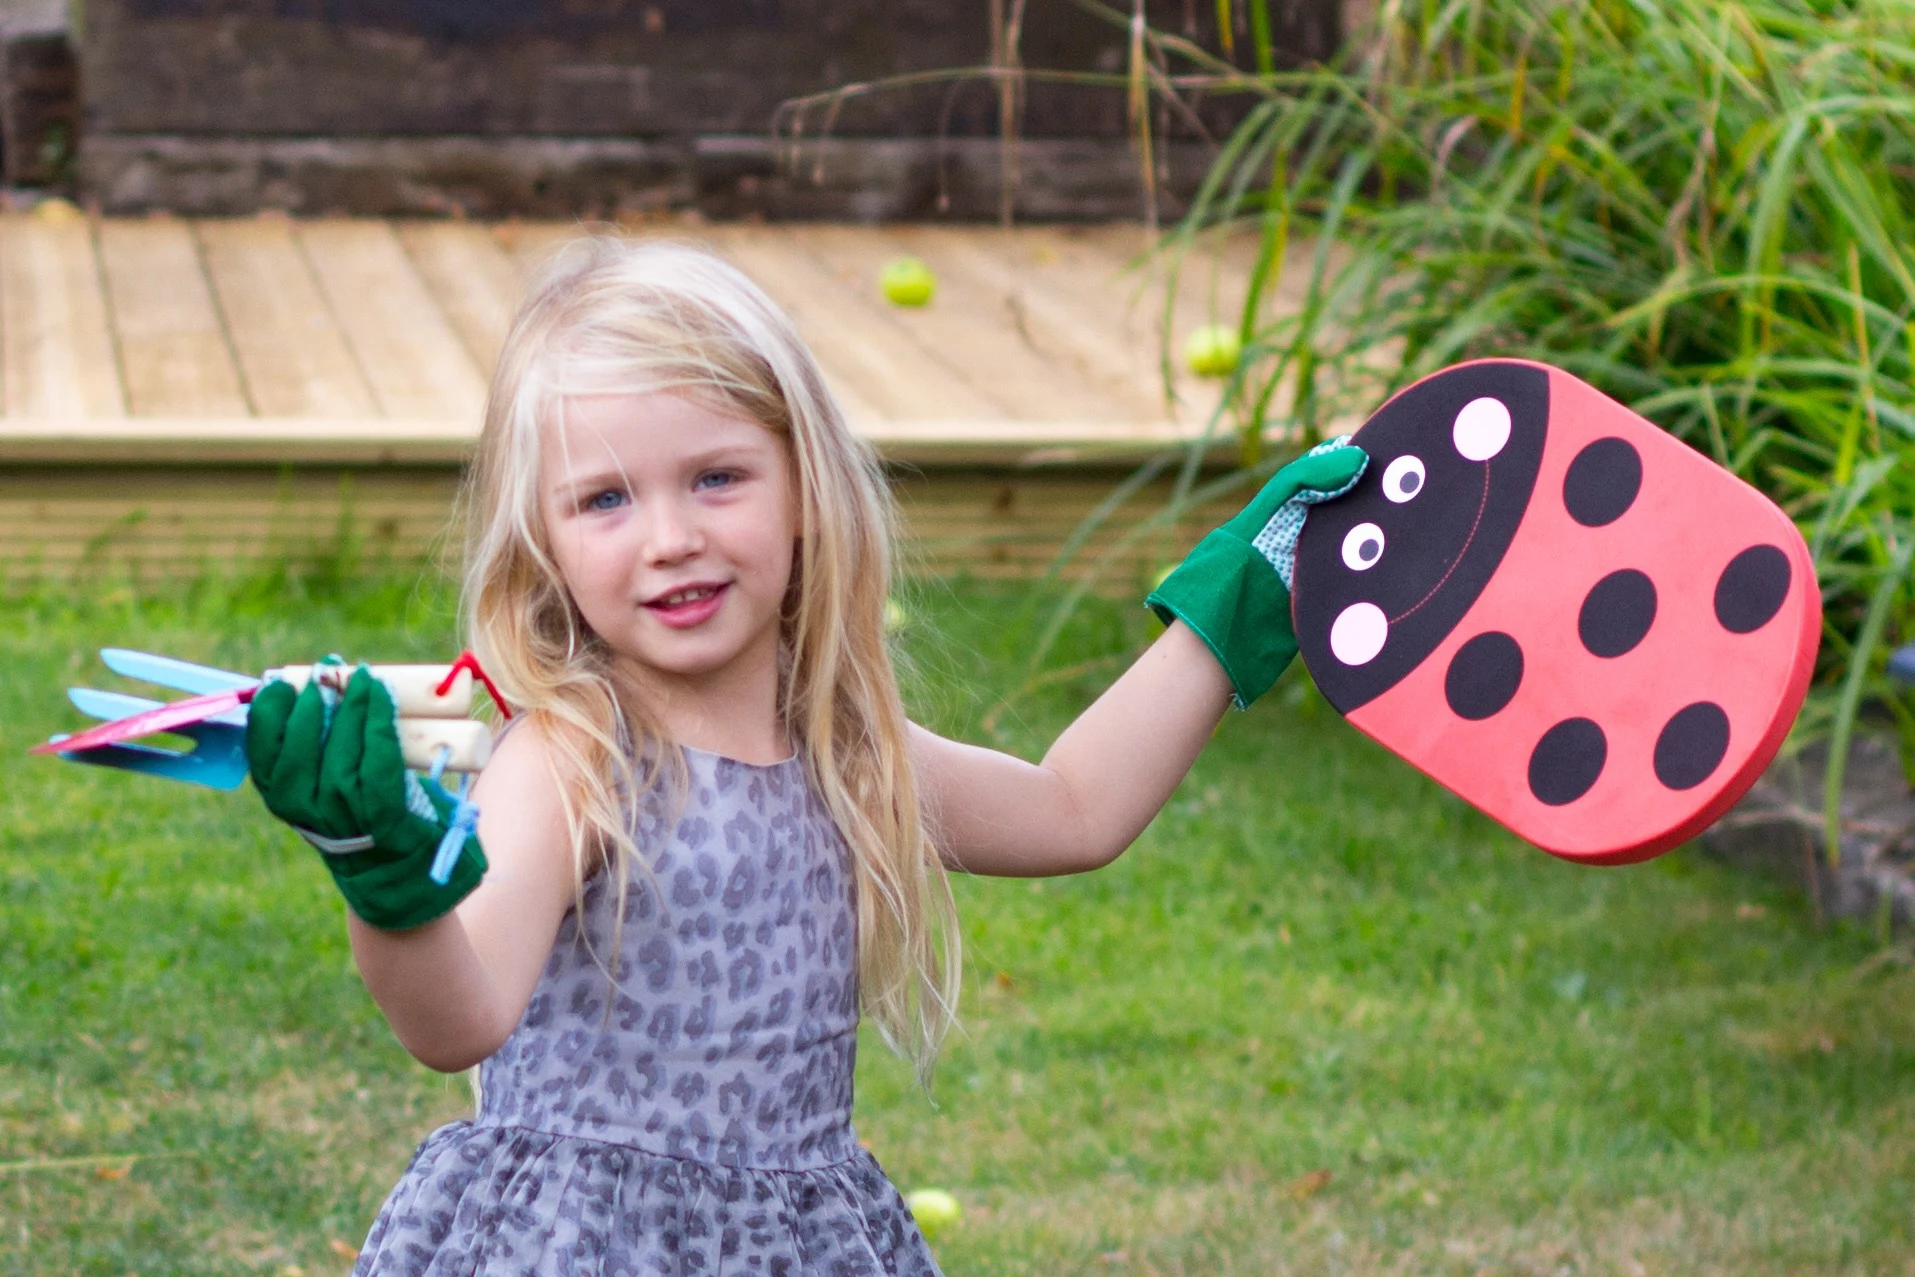 A young child holding gardening gloves and tools